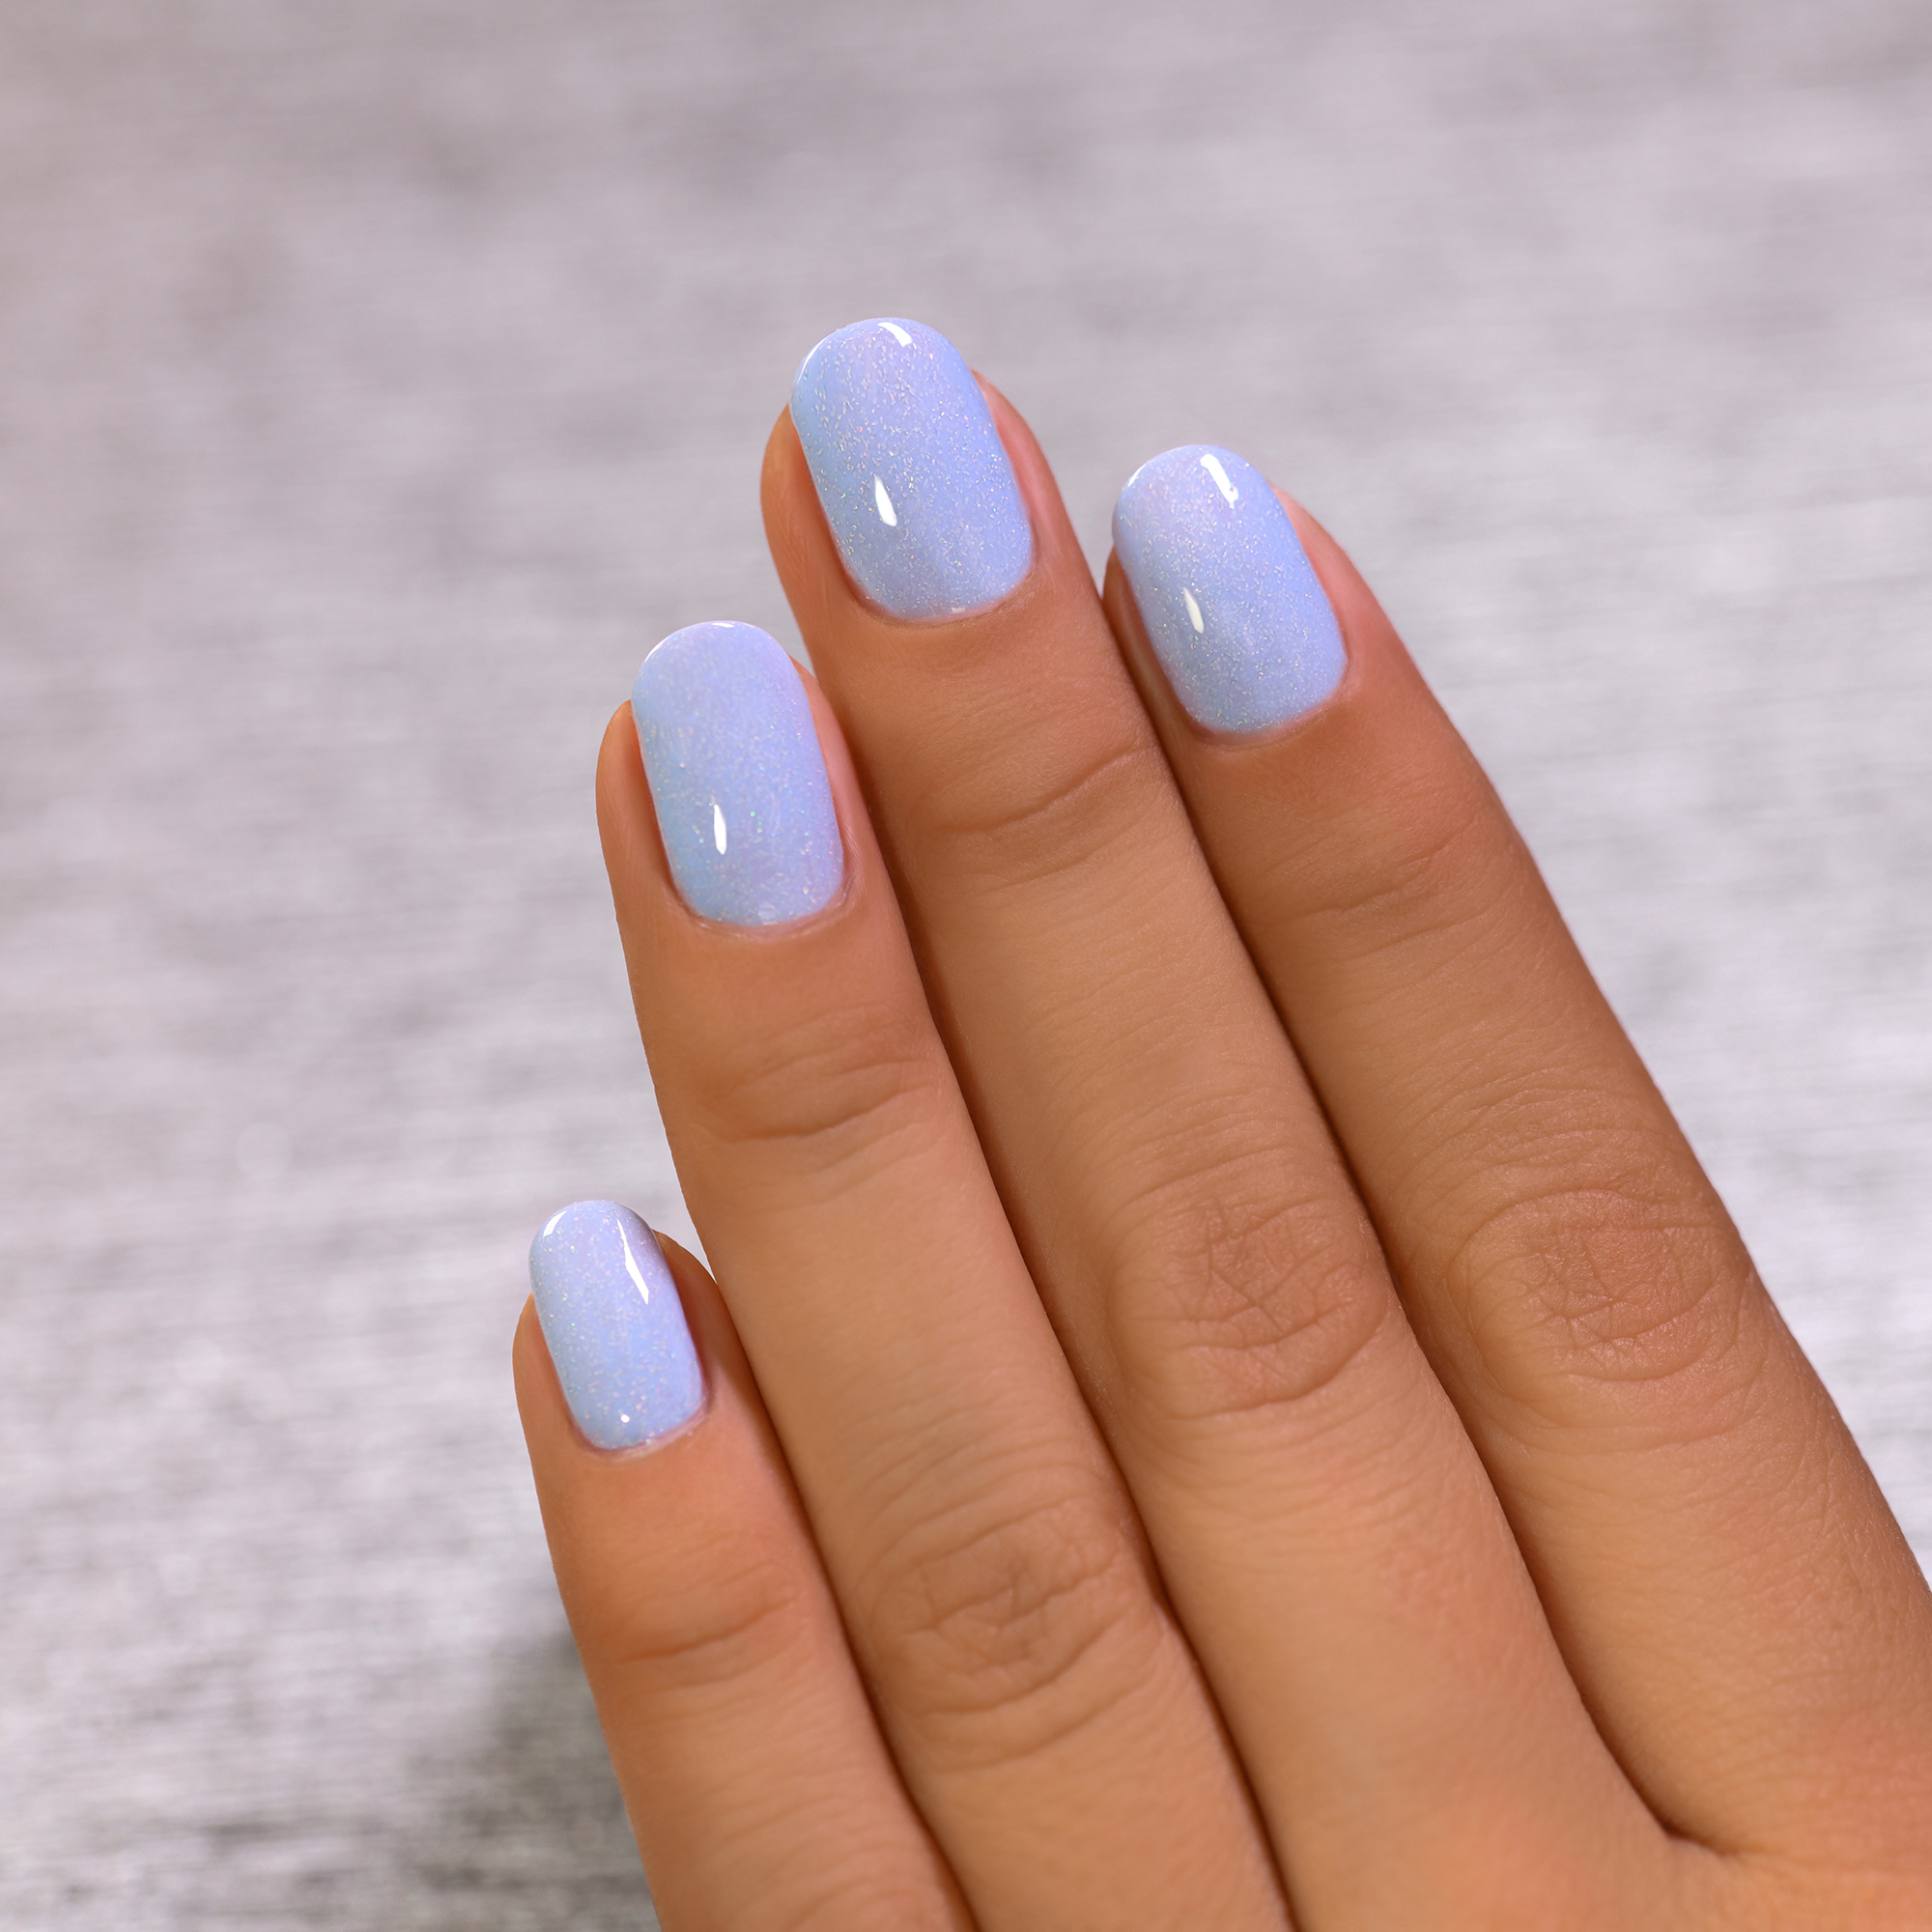 Periwinkle Nails. Hottest 70+ Spring Nail Colors - 62